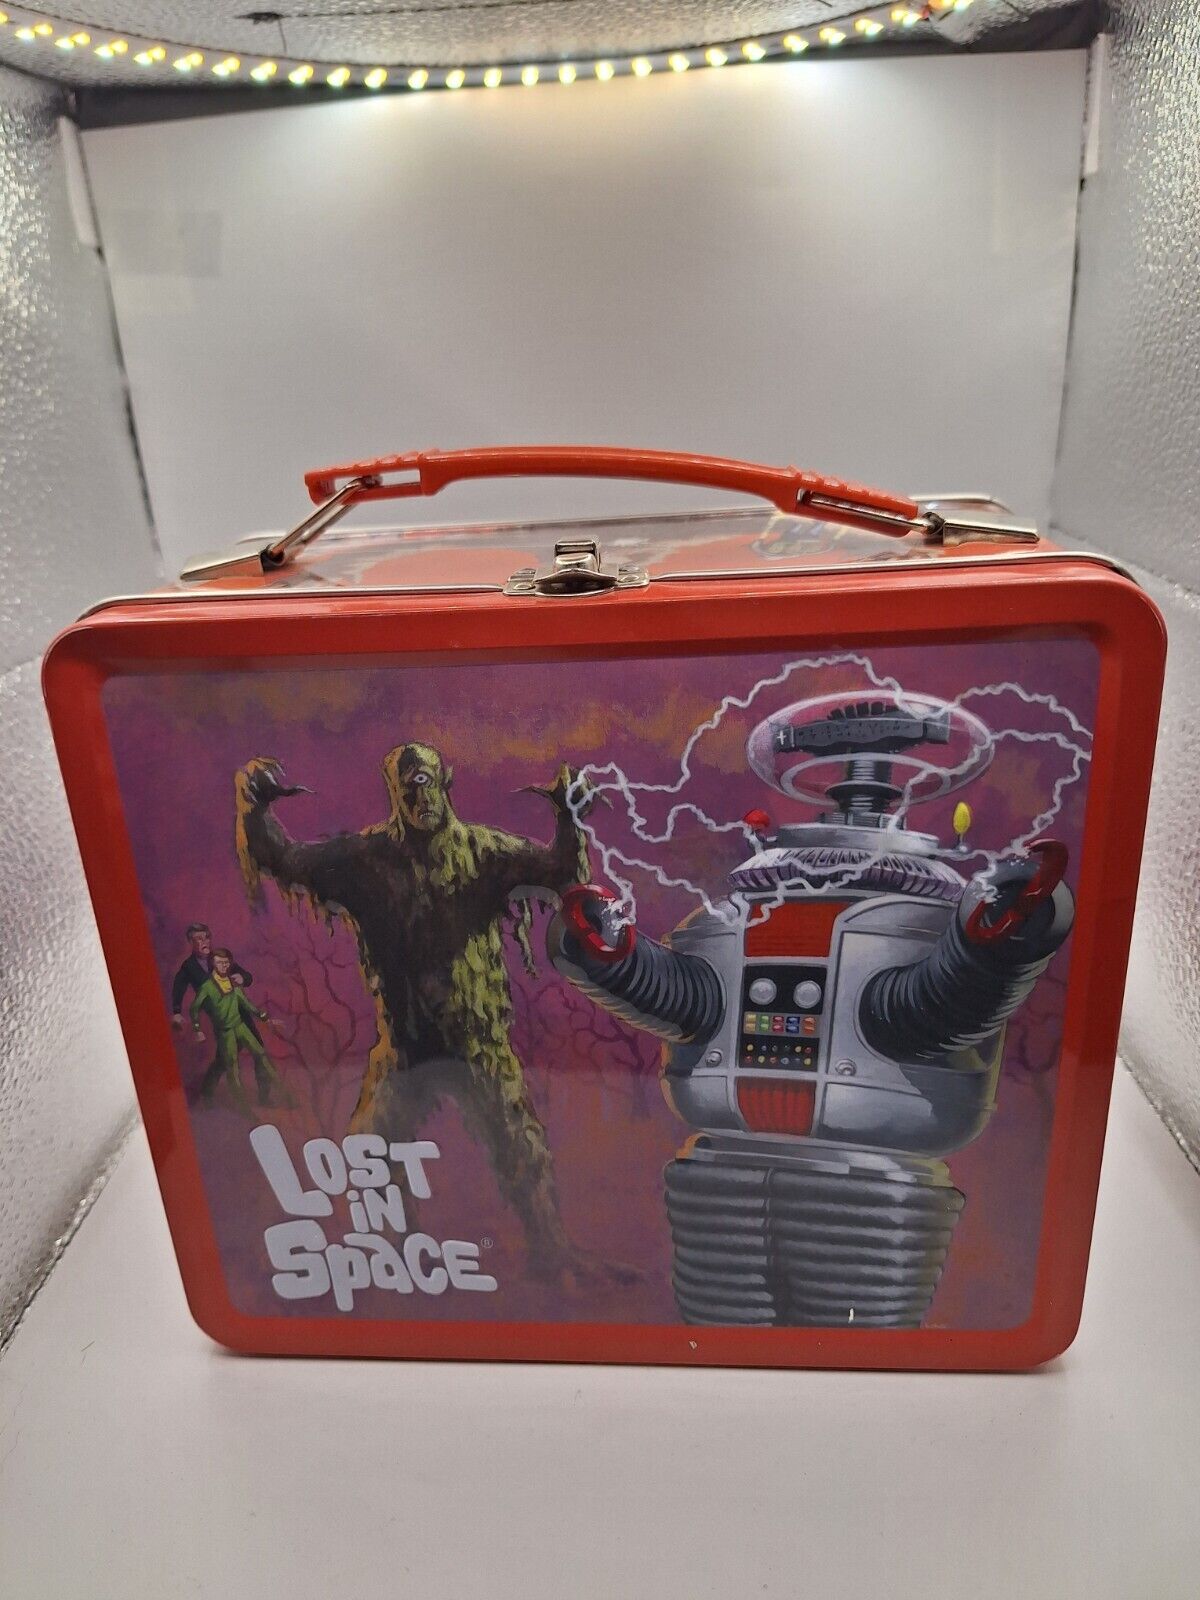 LOST IN SPACE Metal Lunchbox 2008   Used